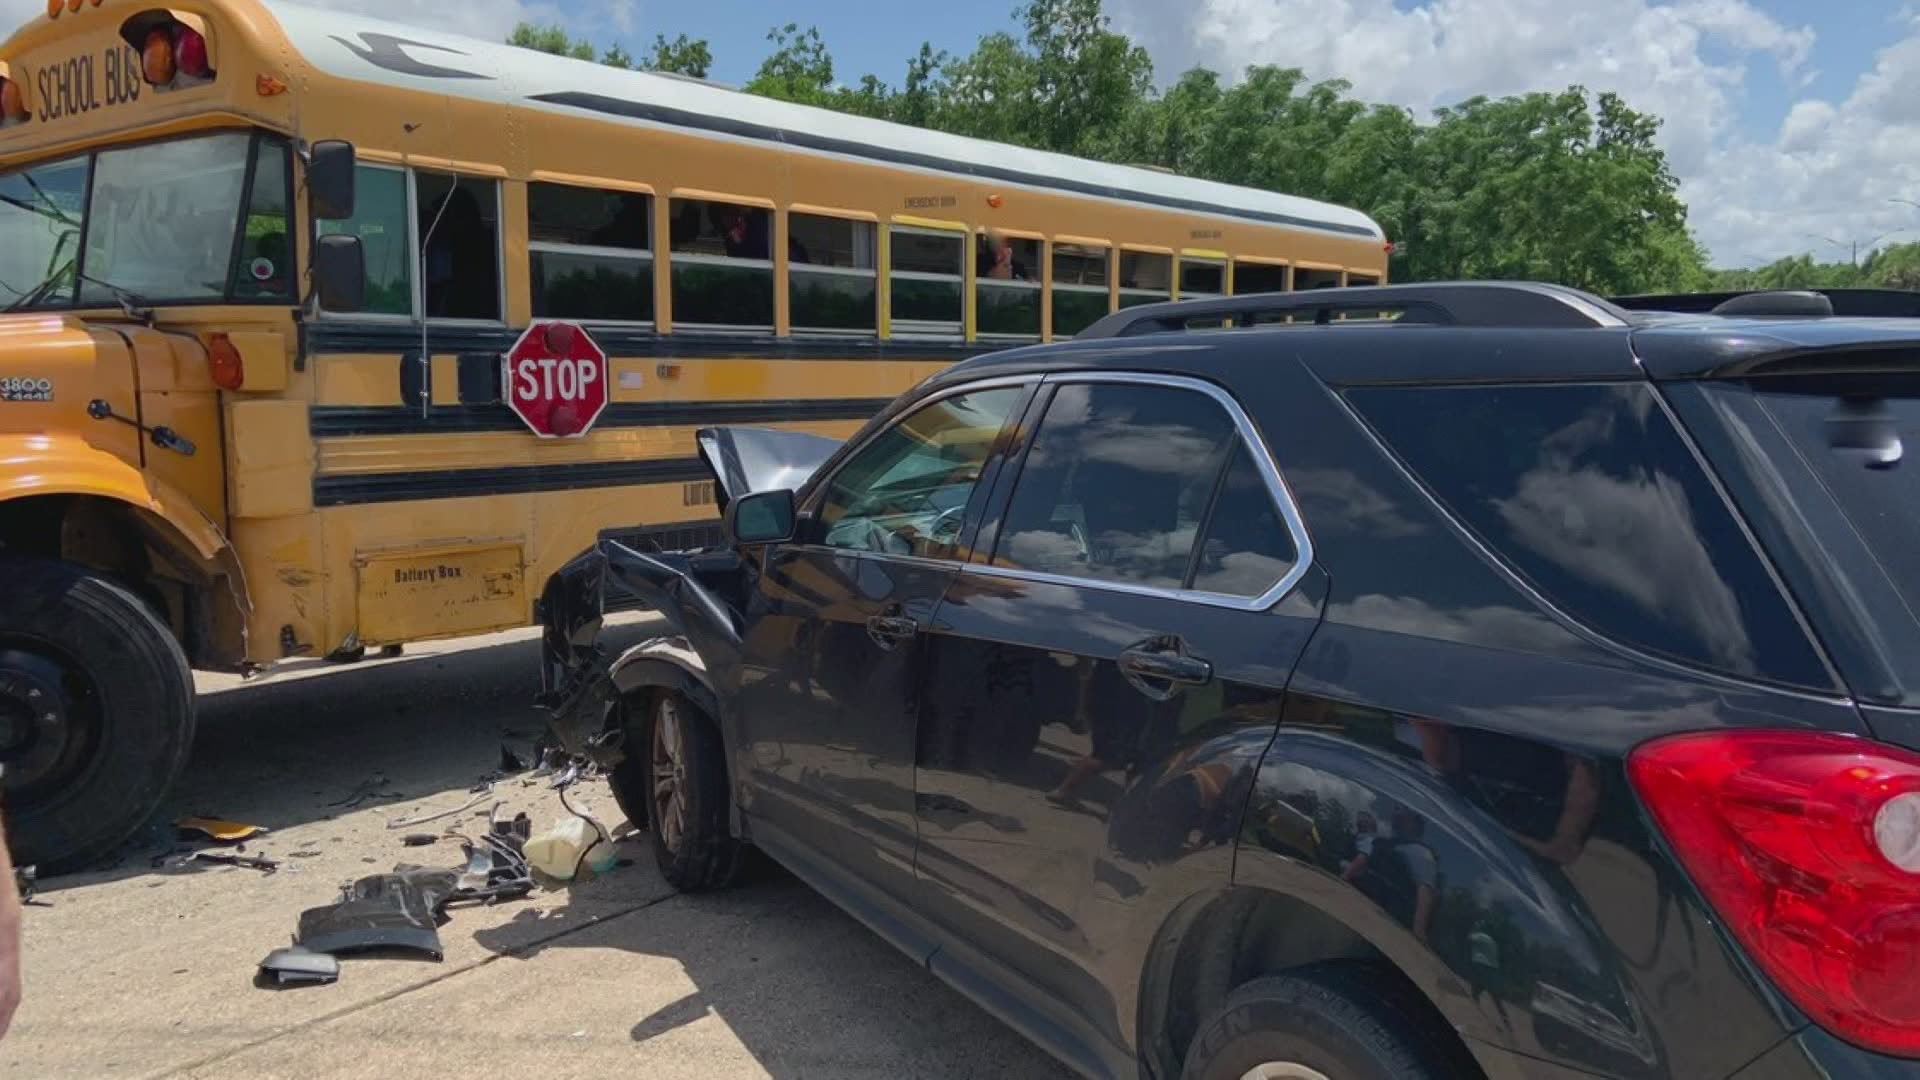 There were 14 children on the bus when the crash occurred - 2 had minor injuries.